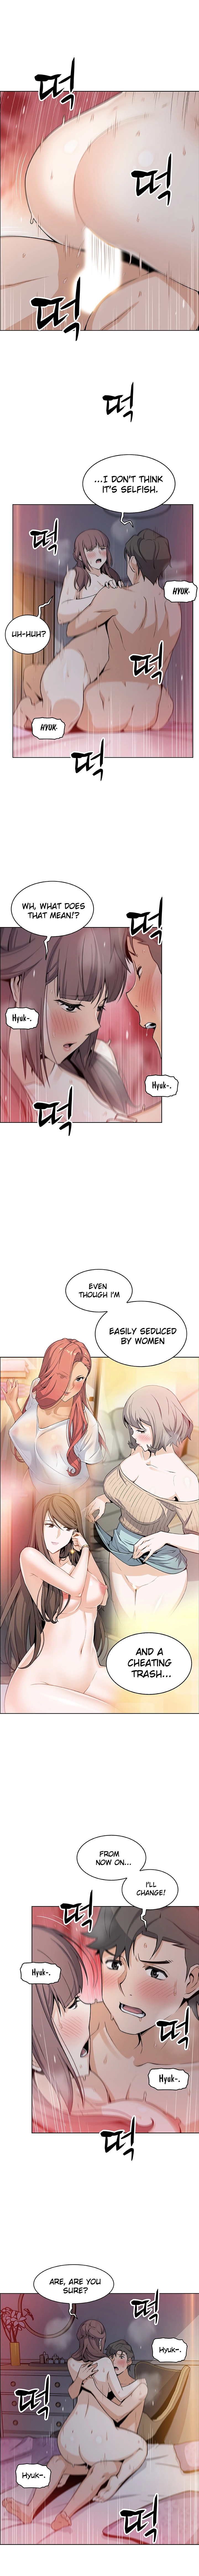 Housekeeper Manhwa - Chapter 29 Page 5